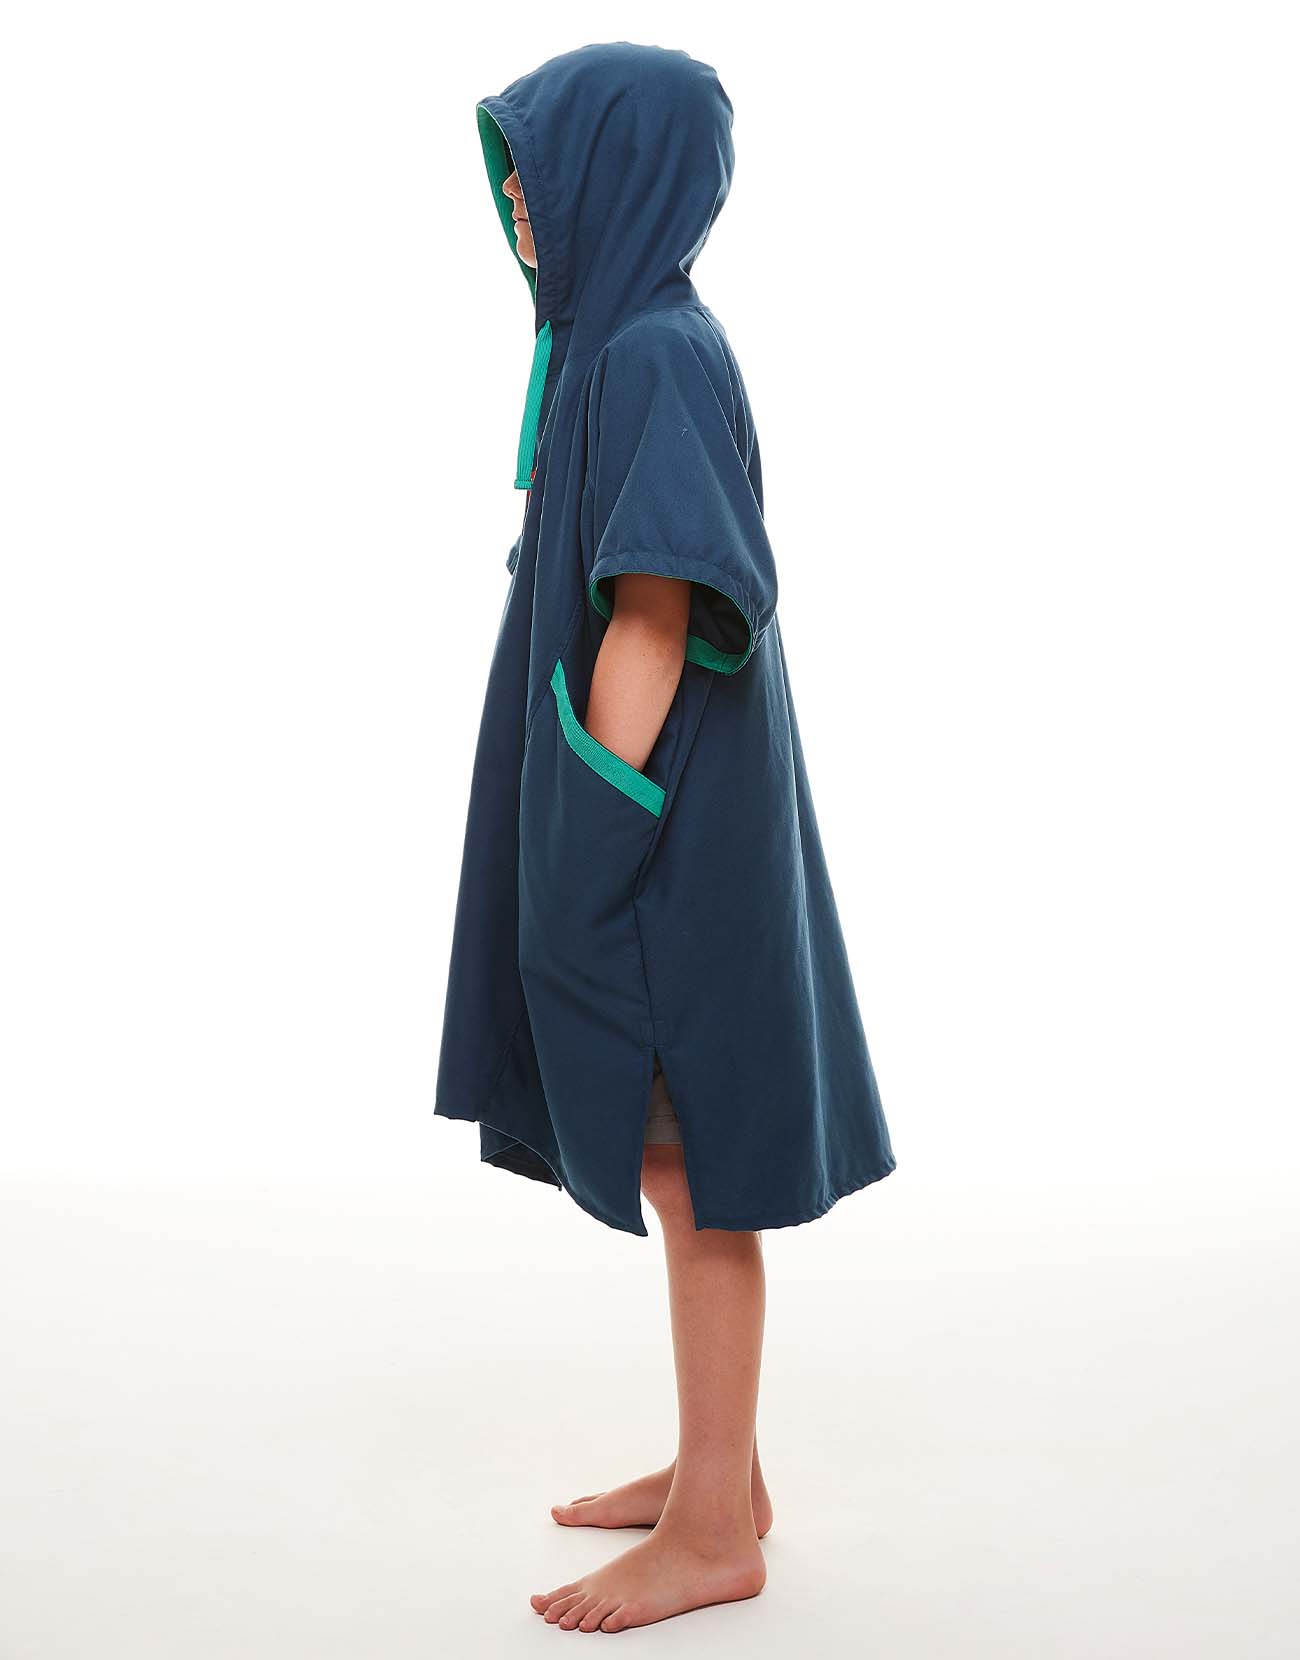 Kid's Quick Dry Microfibre Changing Robe - Navy